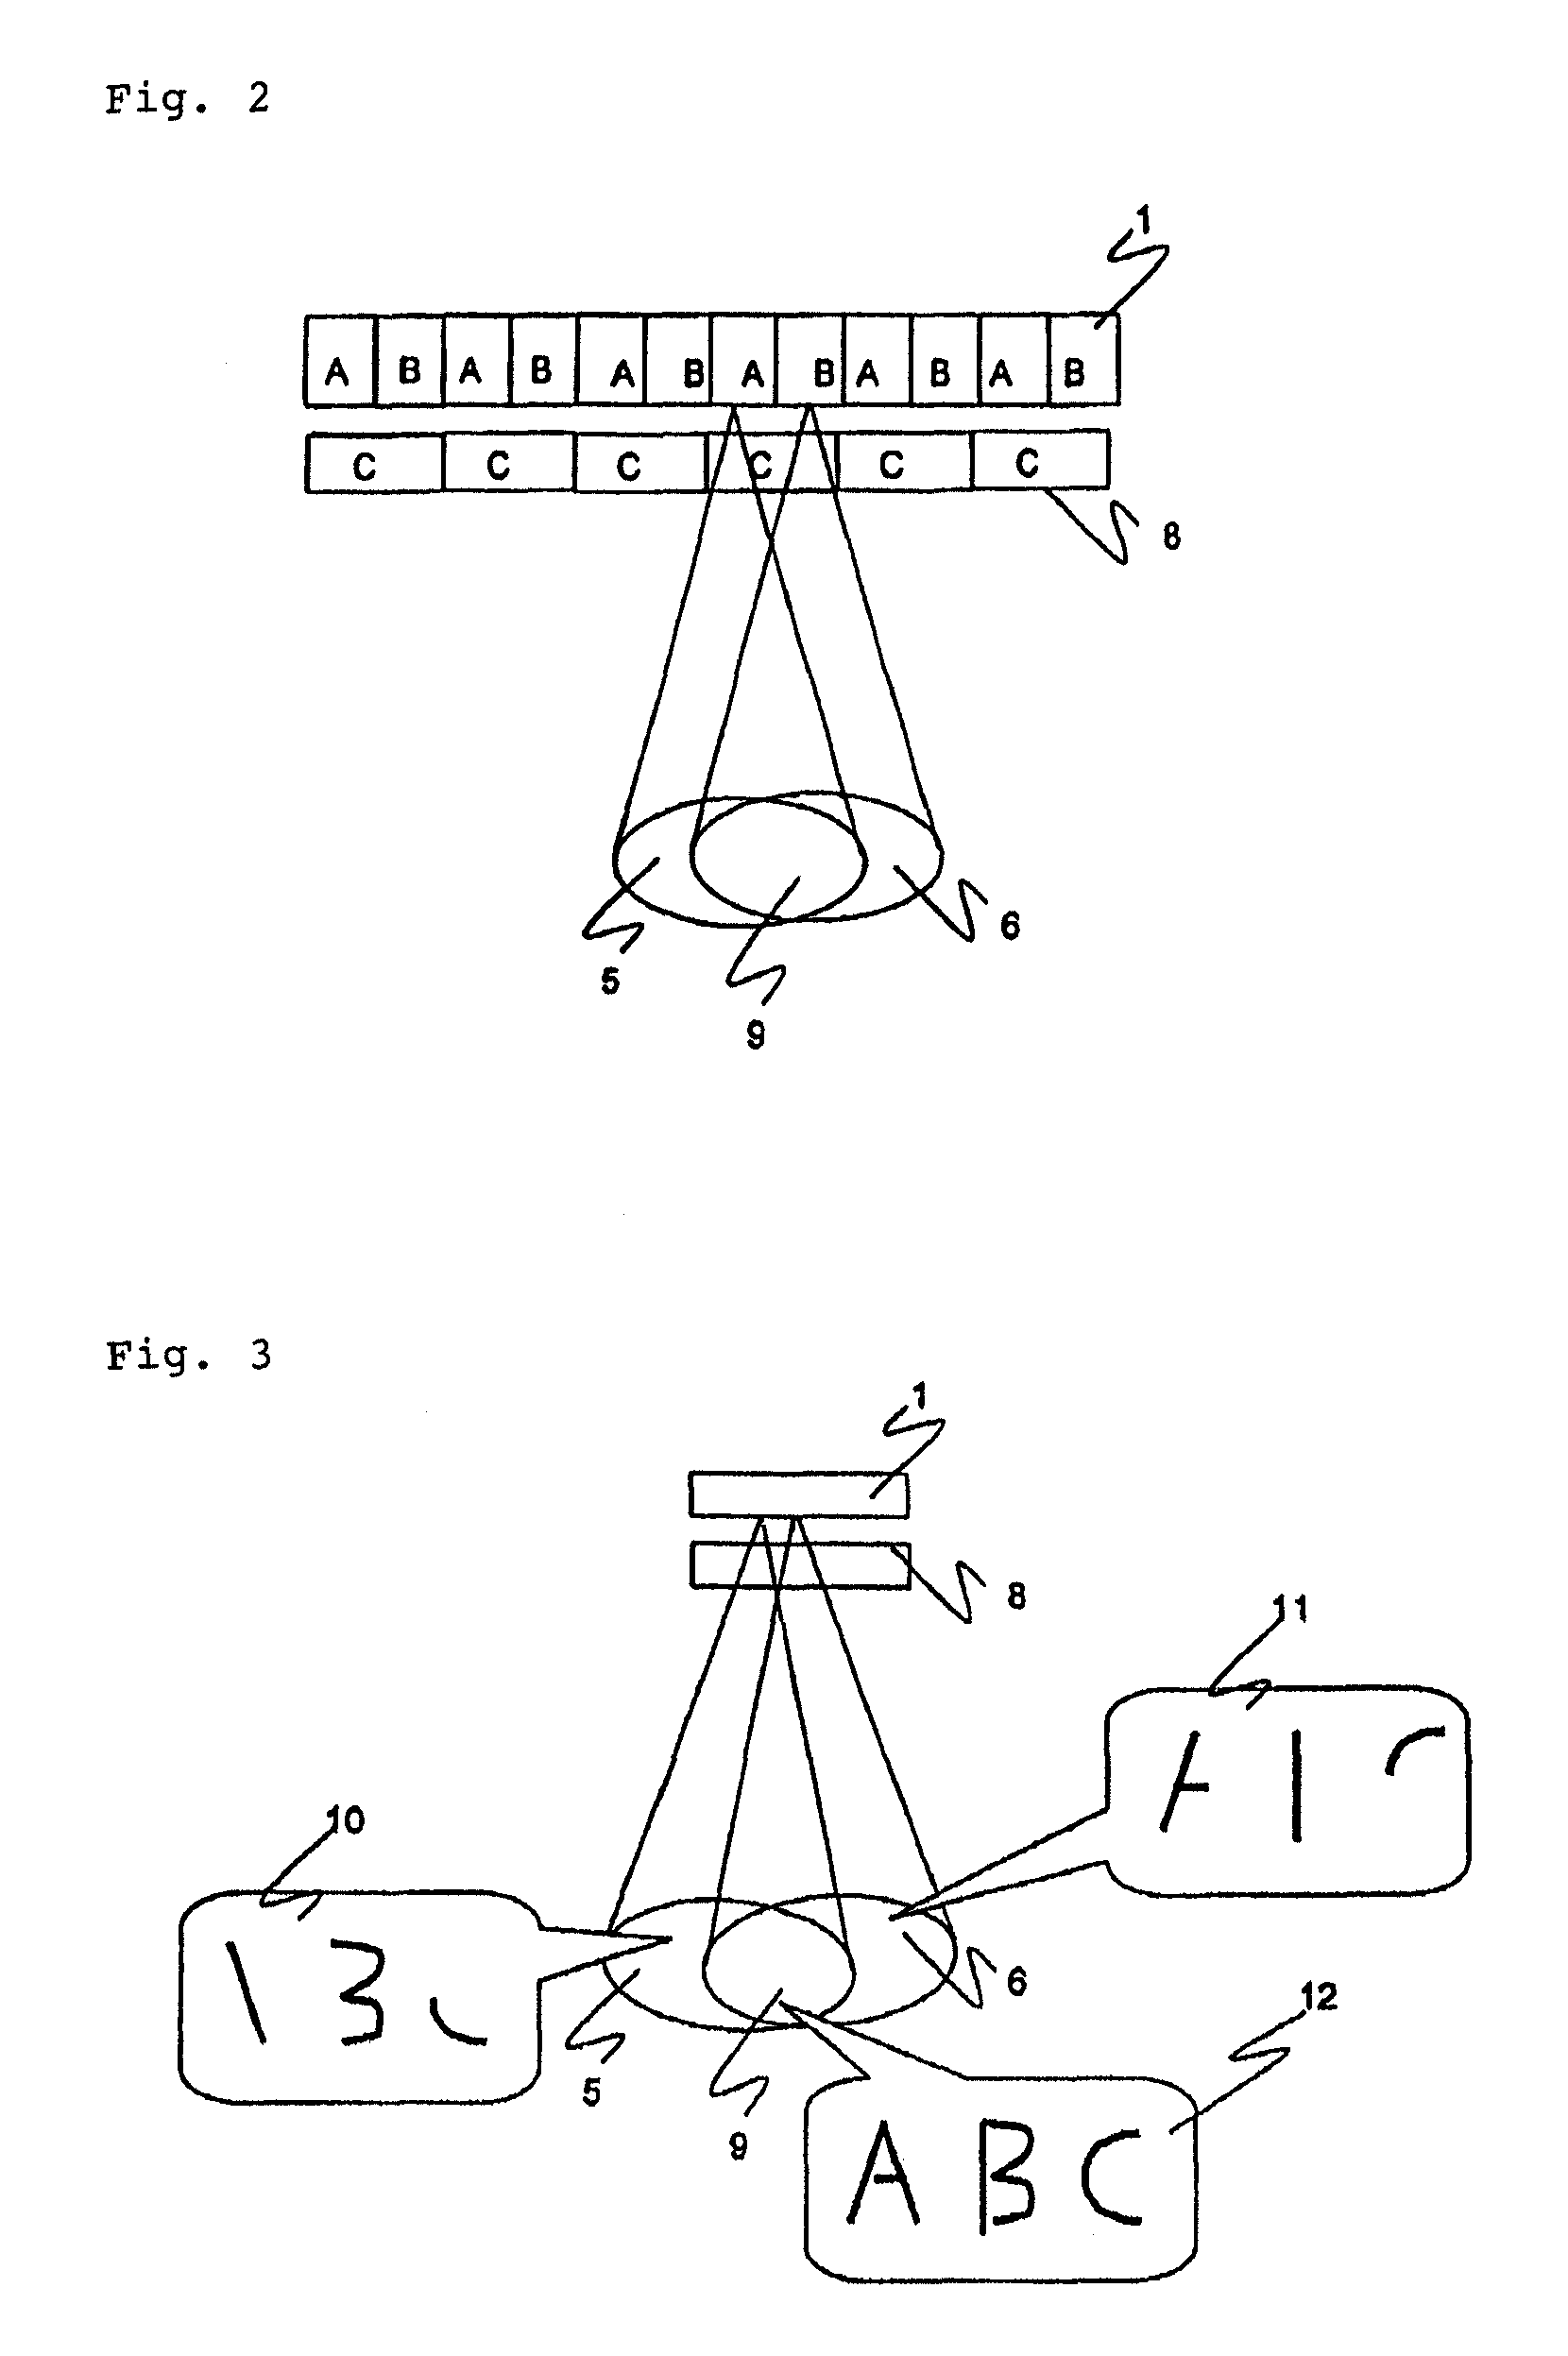 Display device with lens array or parallax barrier that switches between narrow view mode and wide view mode